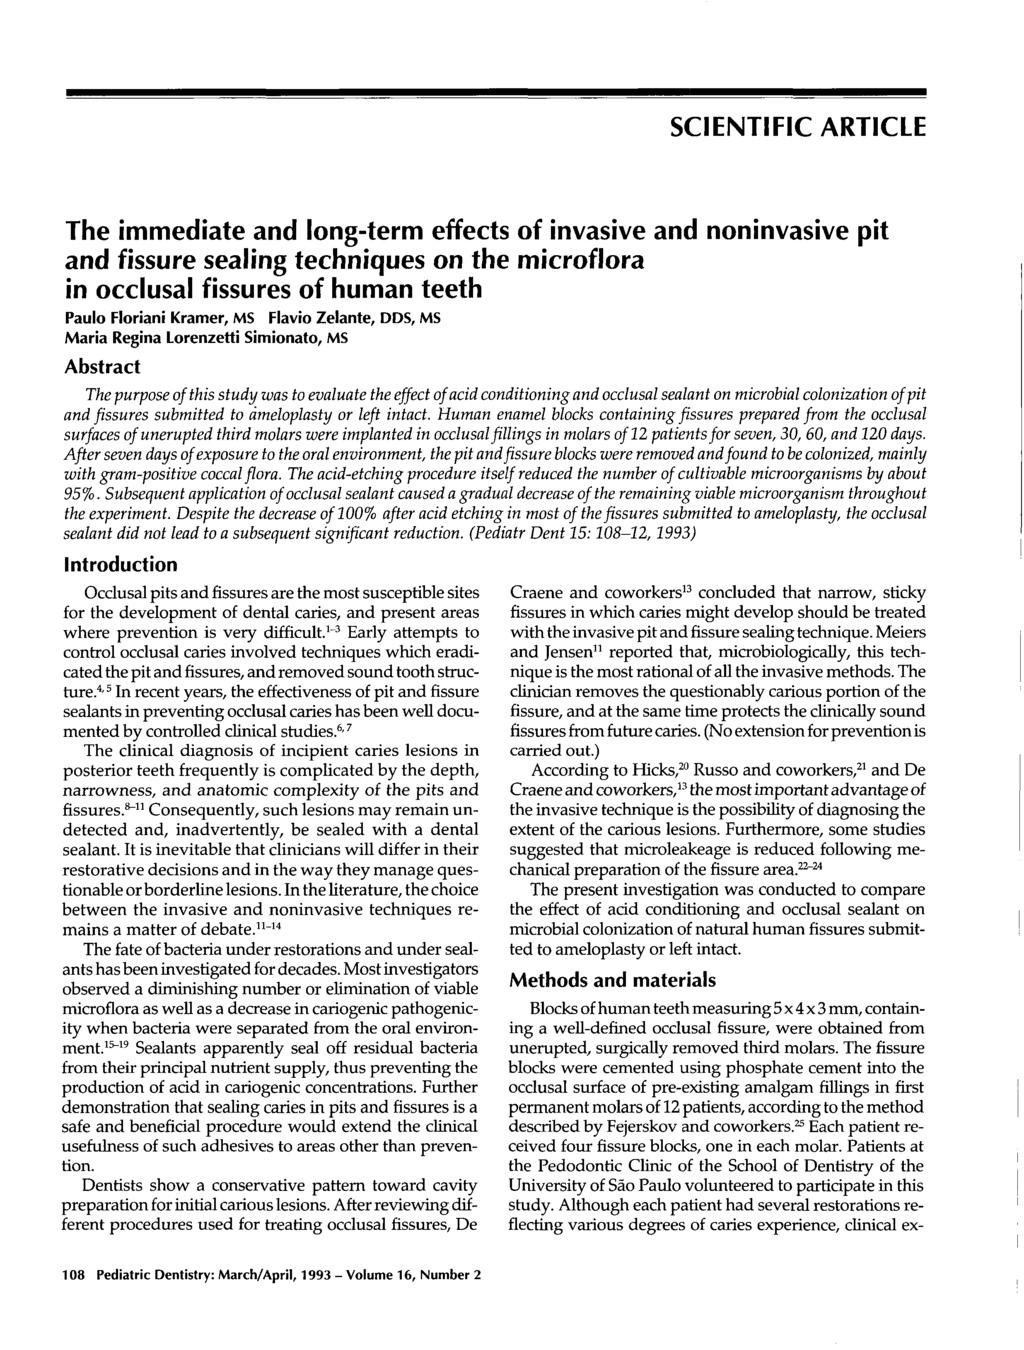 SCIENTIFIC ARTICLE The immediate and long-term effects of invasive and noninvasive pit and fissure sealing techniques on the microflora in occlusal fissures of human teeth Paulo Floriani Kramer, MS